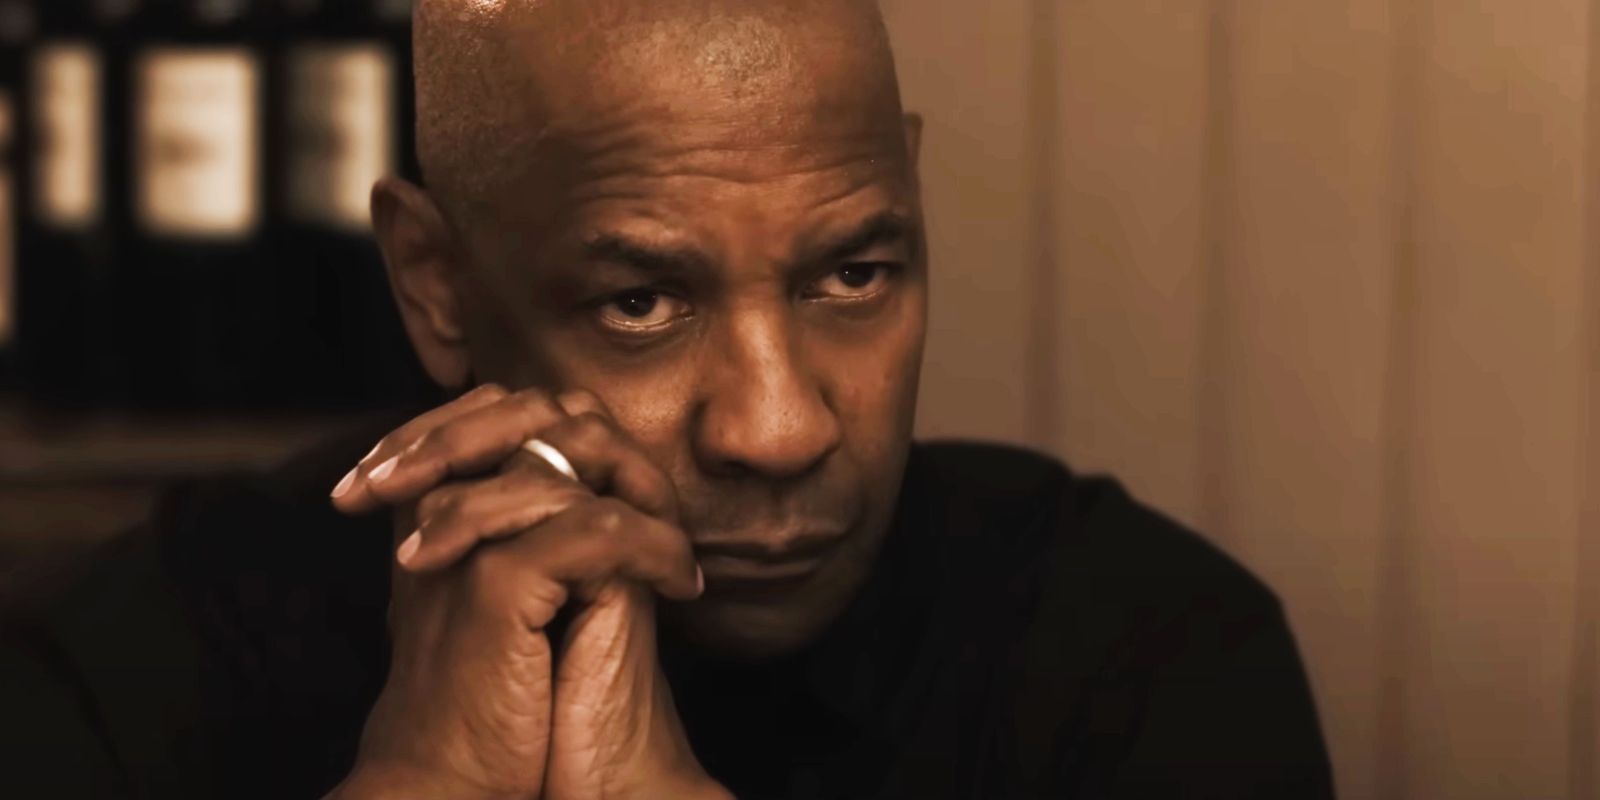 Denzel Washington's Robert McCall leaning on his clasped hands in Equalizer 3